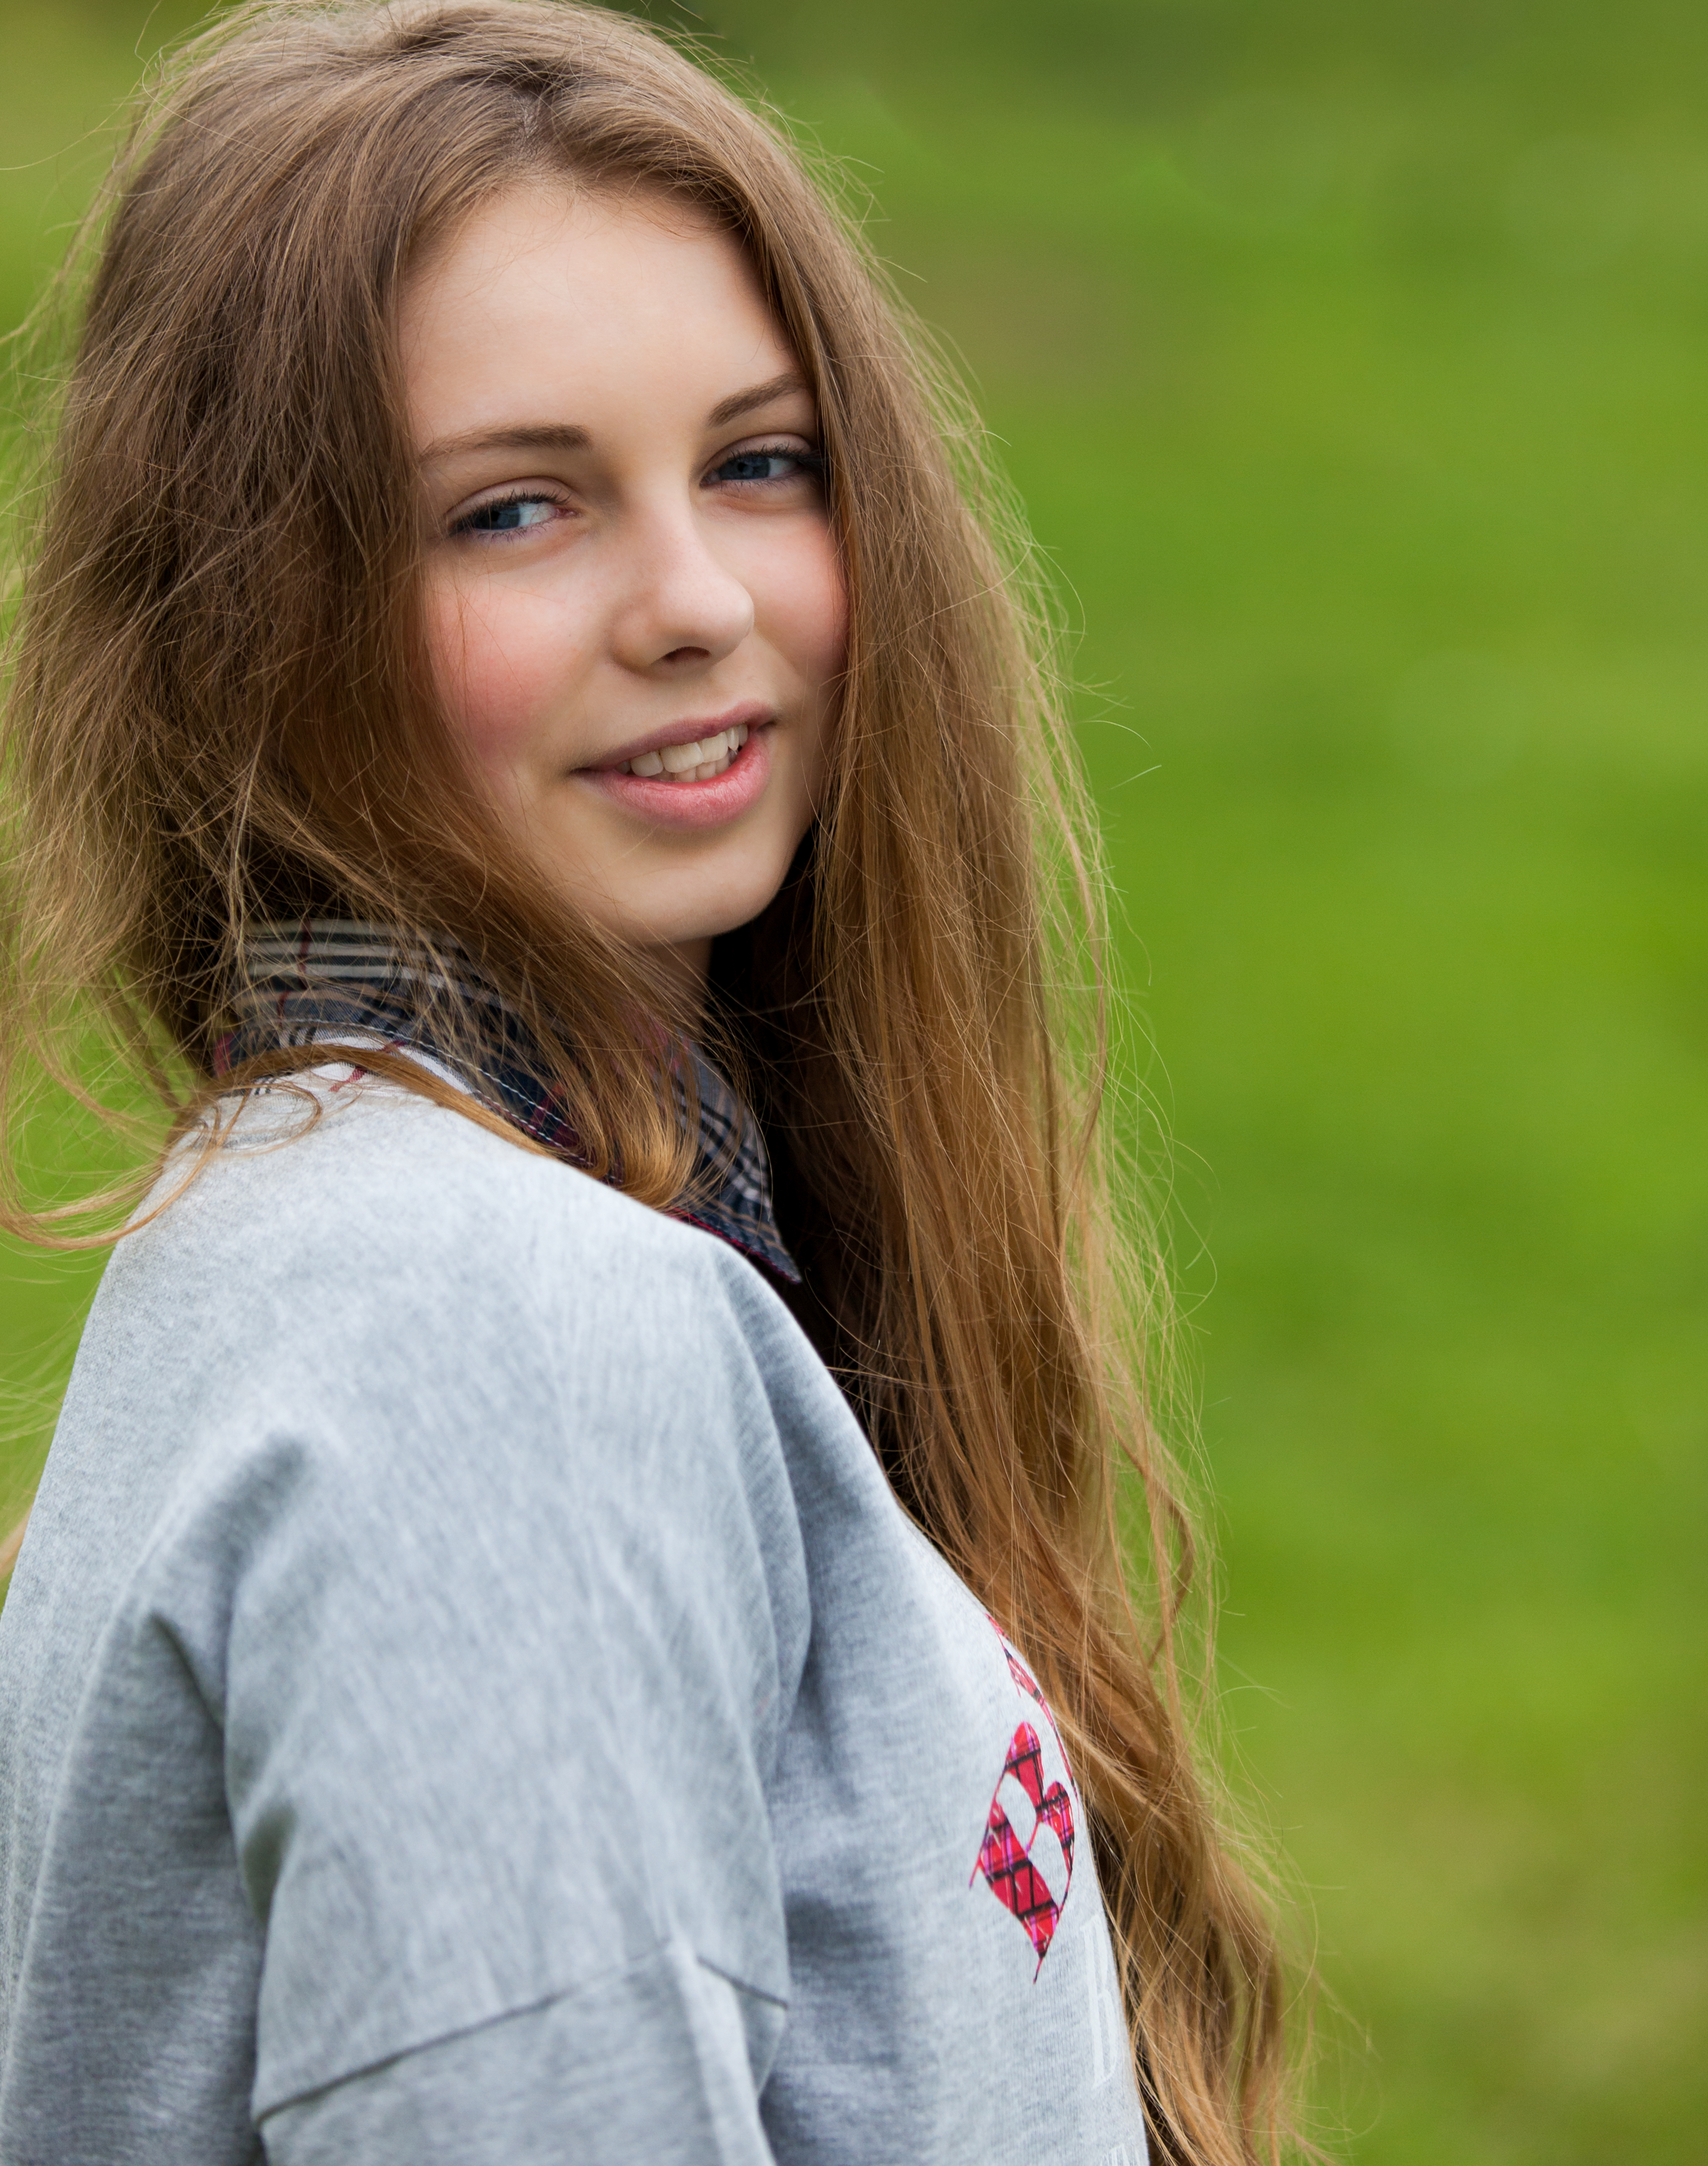 a 15 year-old Catholic girl photographed in May 2015, picture 5. New free p...